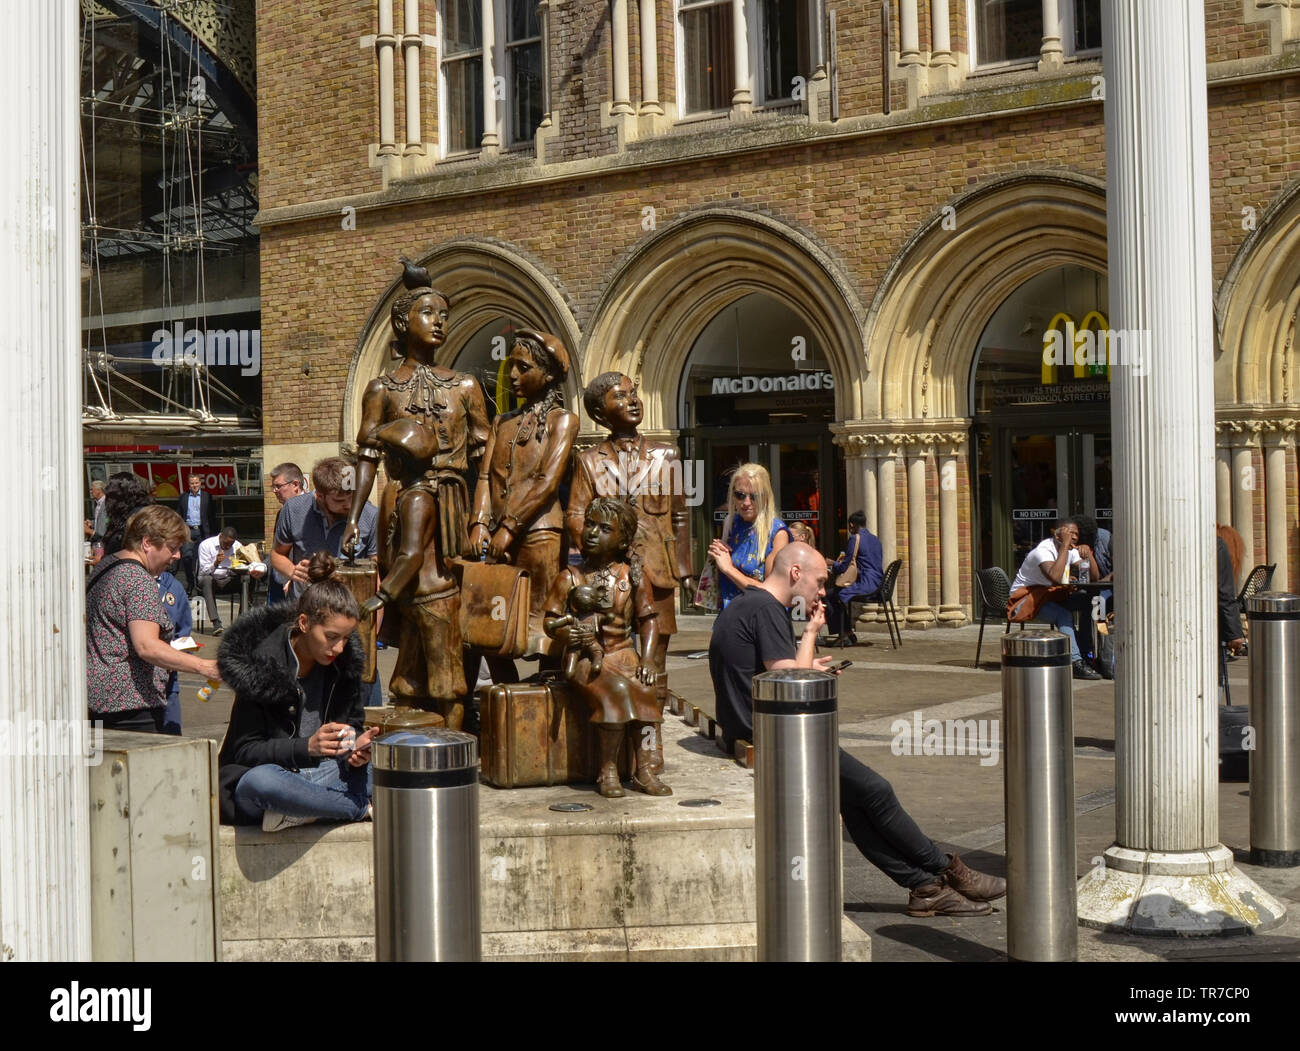 Liverpool street station, London United Kingdom, 14 June 2018. Arriving at the entrance we find a modern polished bronze statue of a collection of fiv Stock Photo